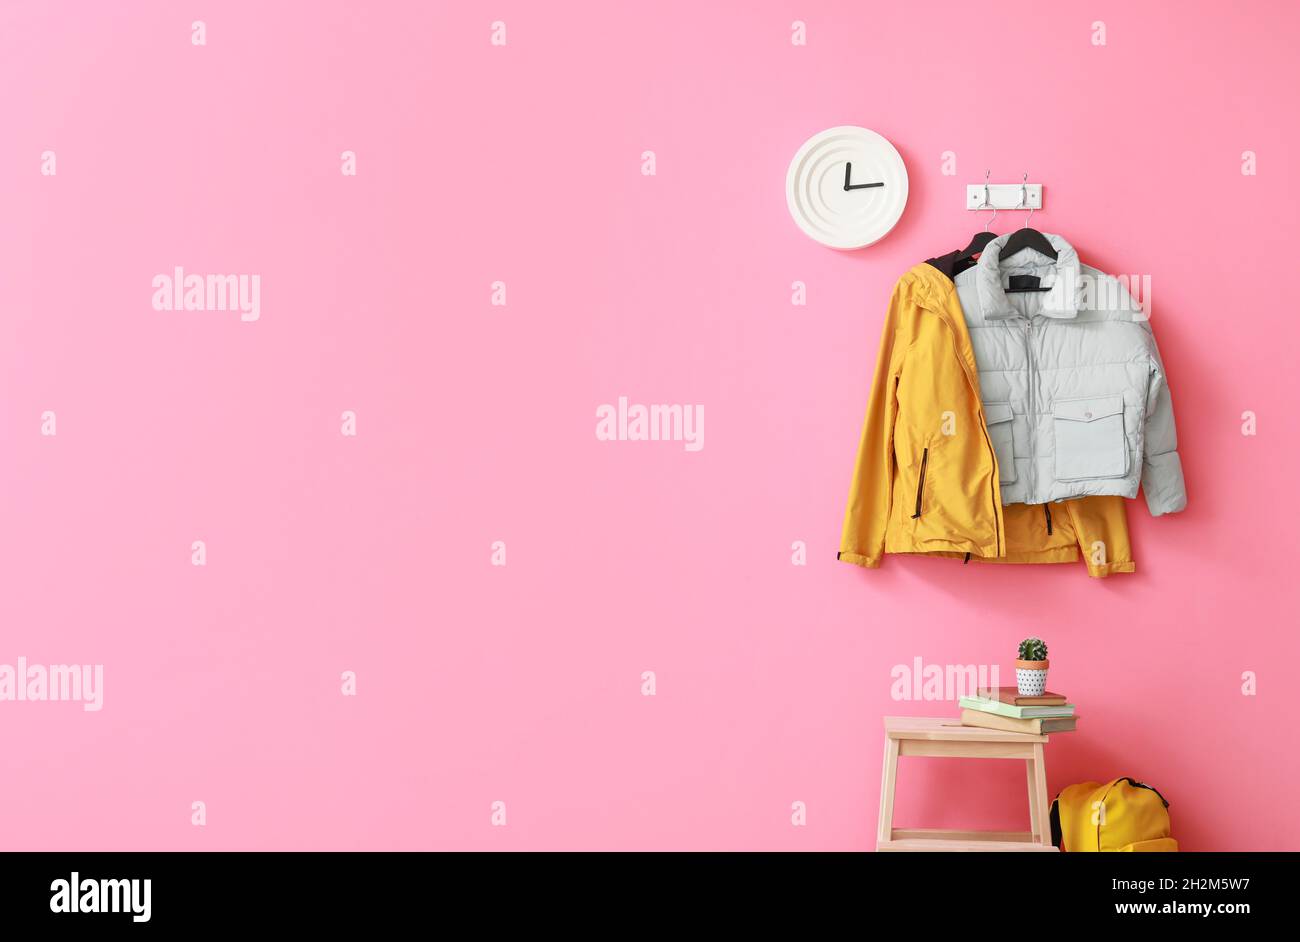 Stylish jackets and clock hanging on pink wall in hallway Stock Photo